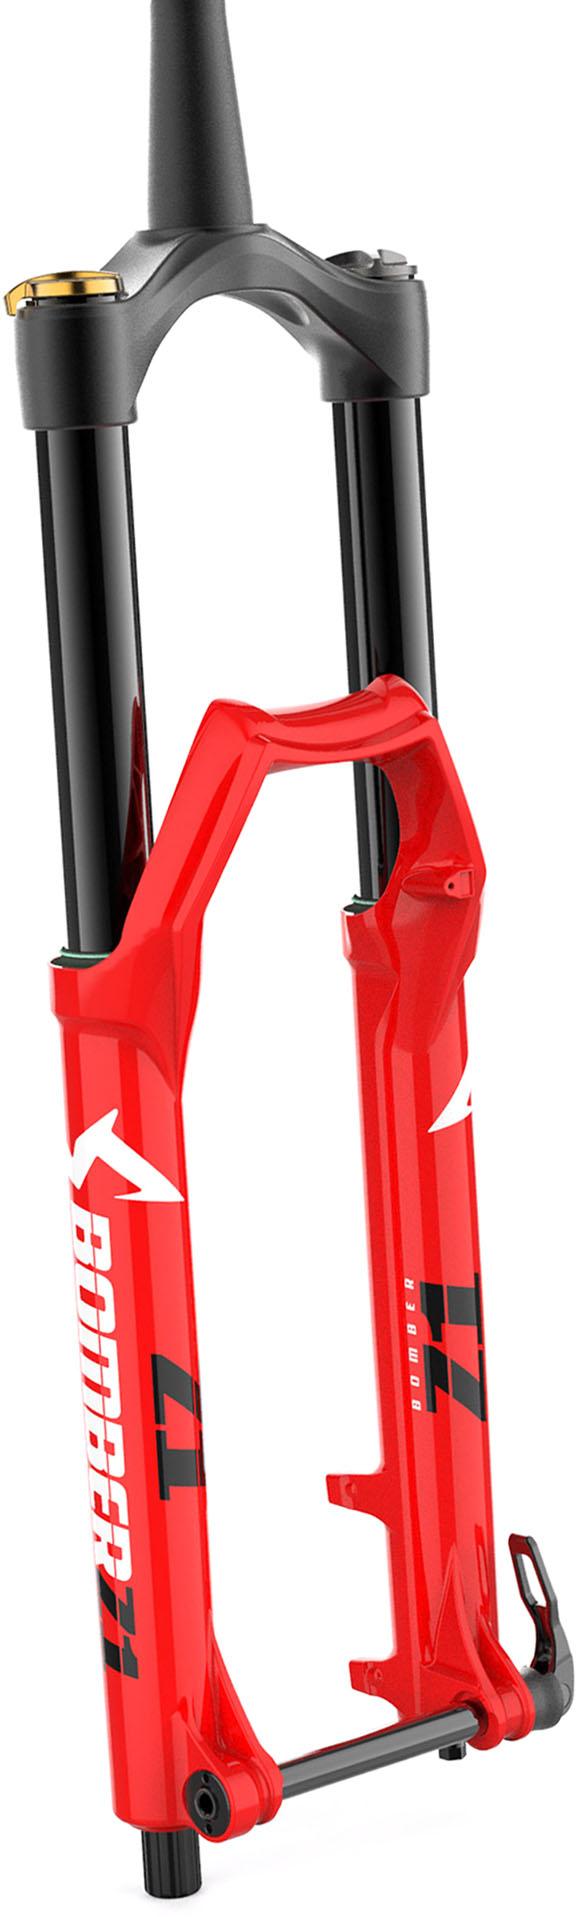 Marzocchi Bomber Z2 Boost Mountain Bike Forks  Gloss Red